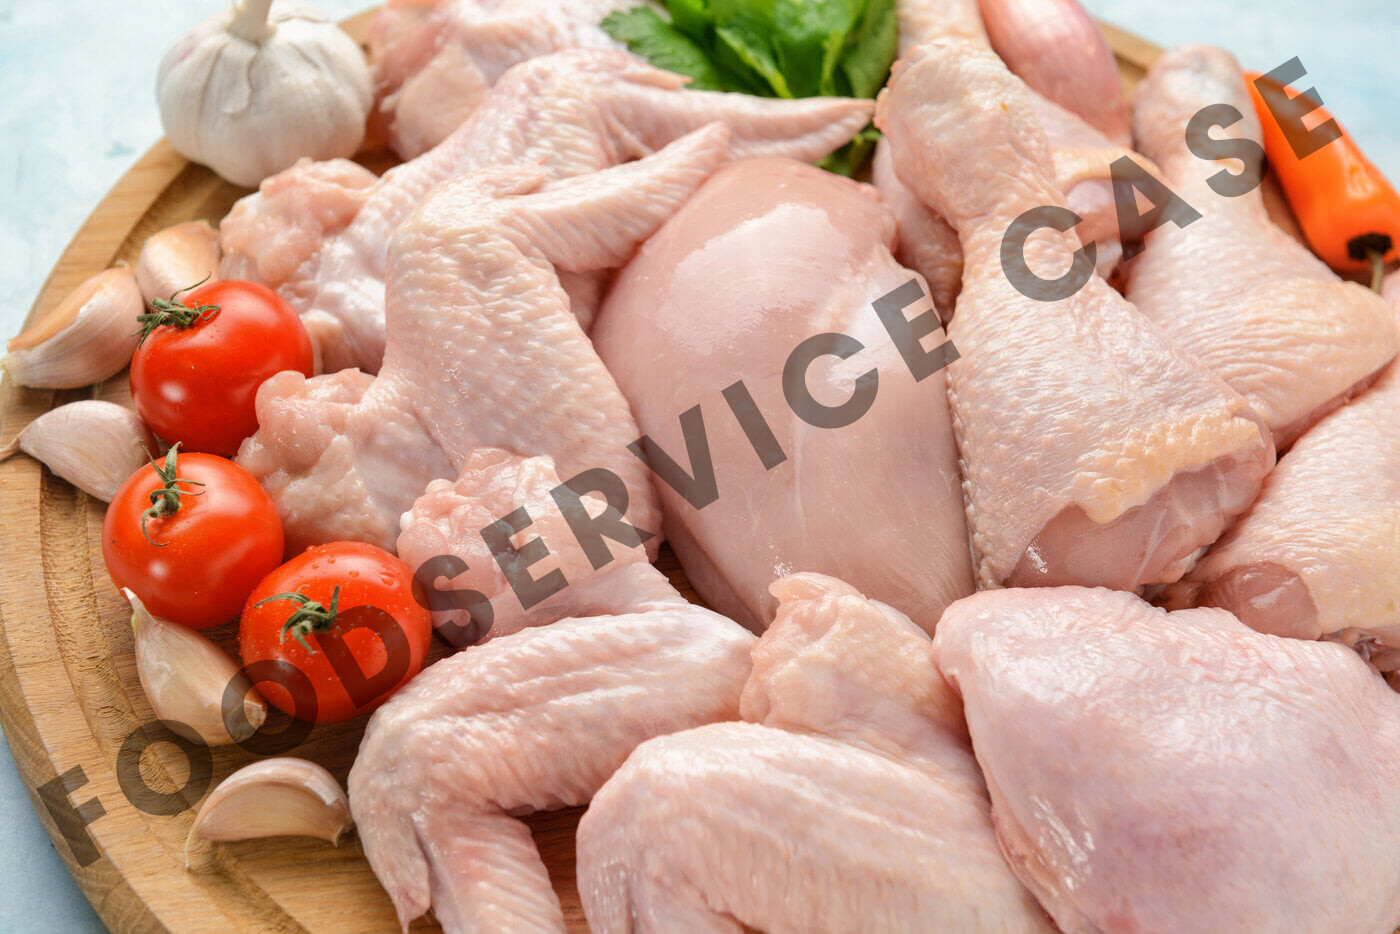 ***FOODSERVICE CASE*** of Chicken Cut In Eighths - (12 Cut Up Fryers) - David Elliot Poultry